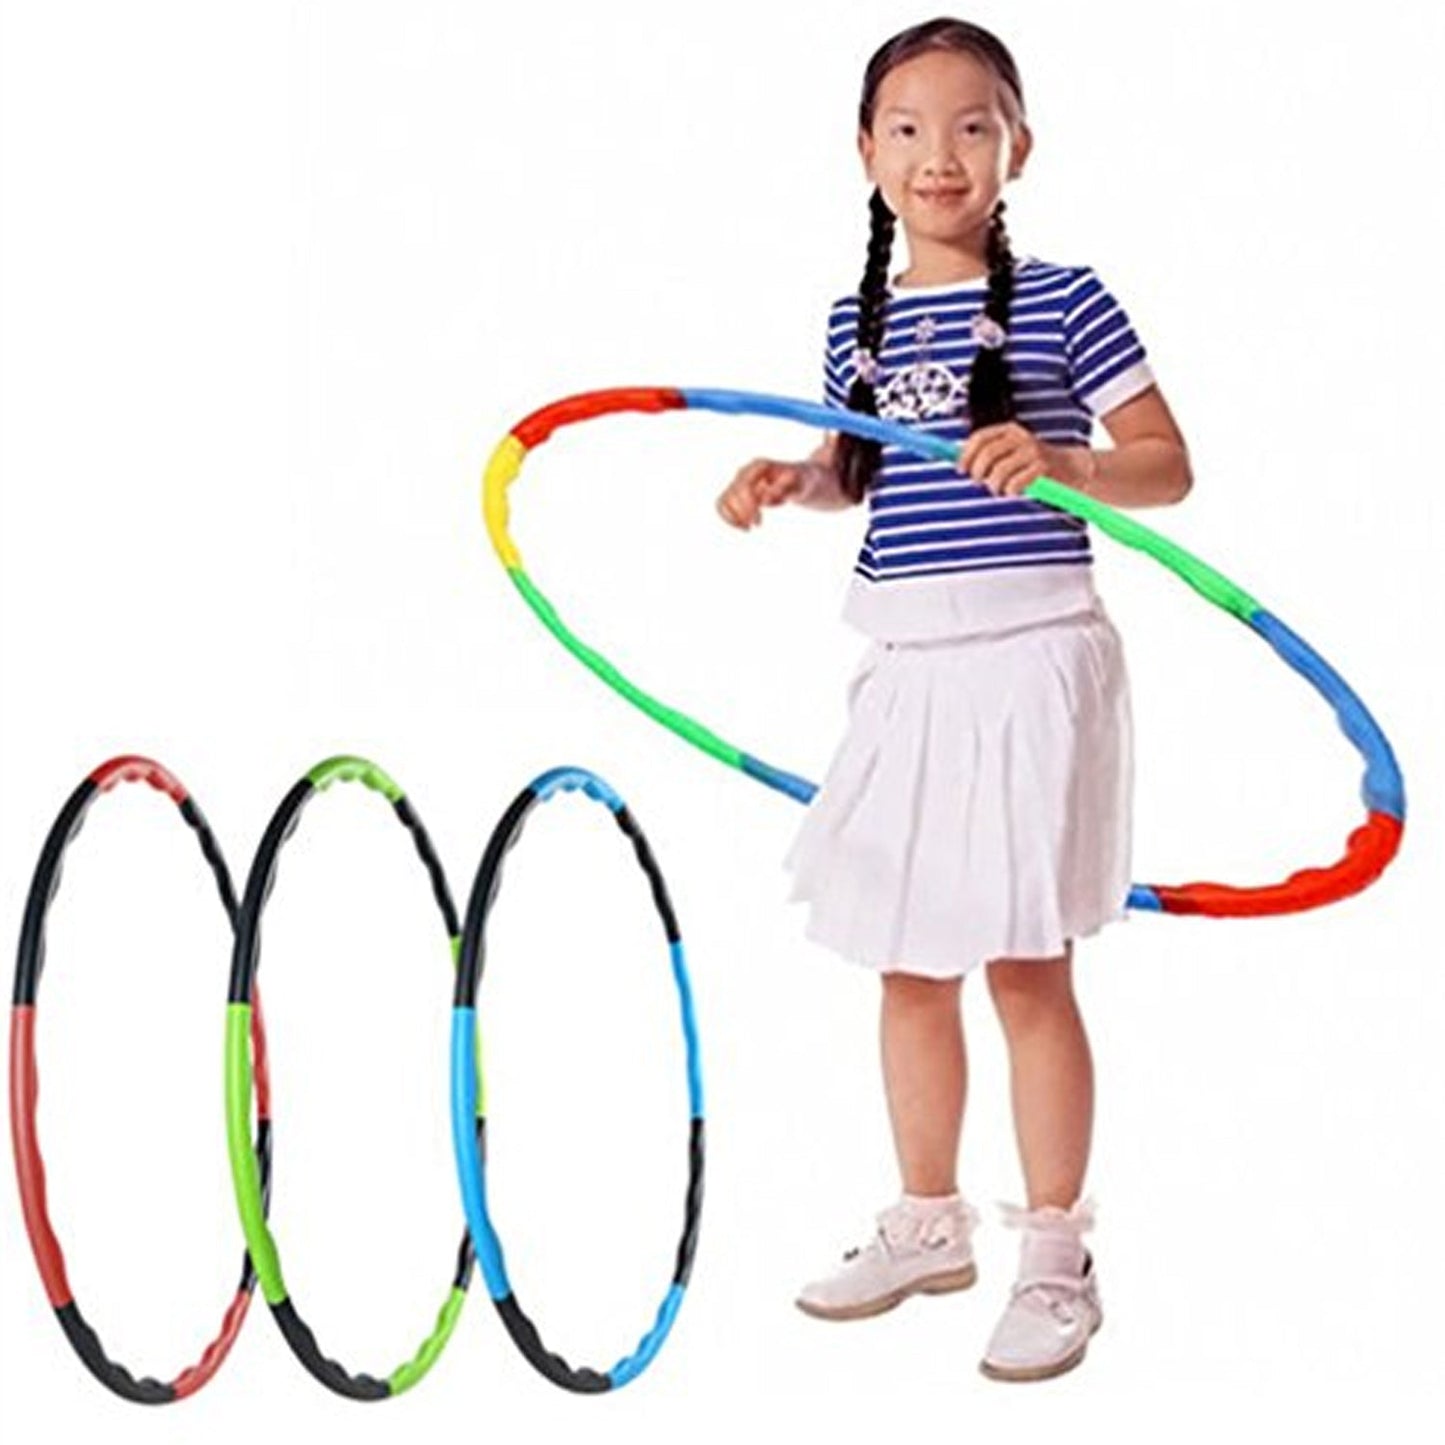 8020 Hoops Hula Interlocking Exercise Ring for Fitness with Dia Meter Boys Girls and Adults 